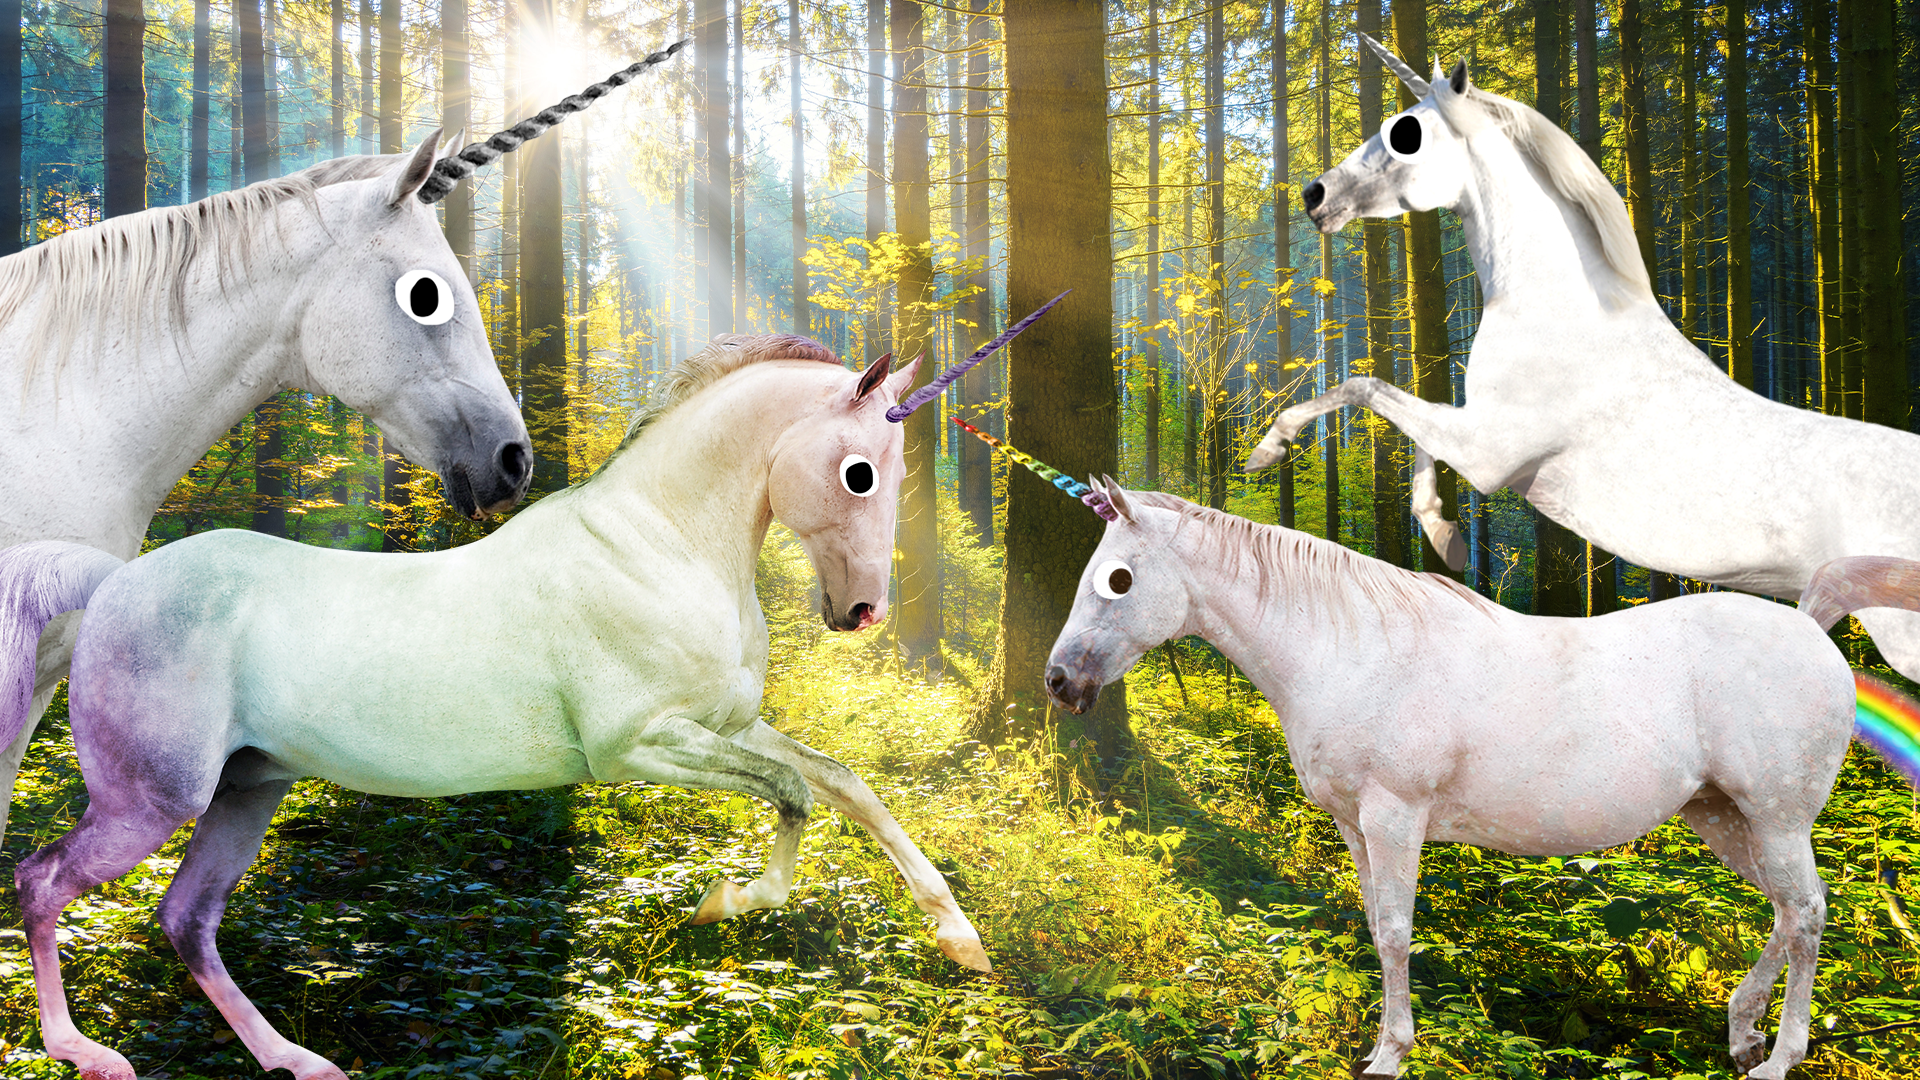 Lots of unicorns in a forest 